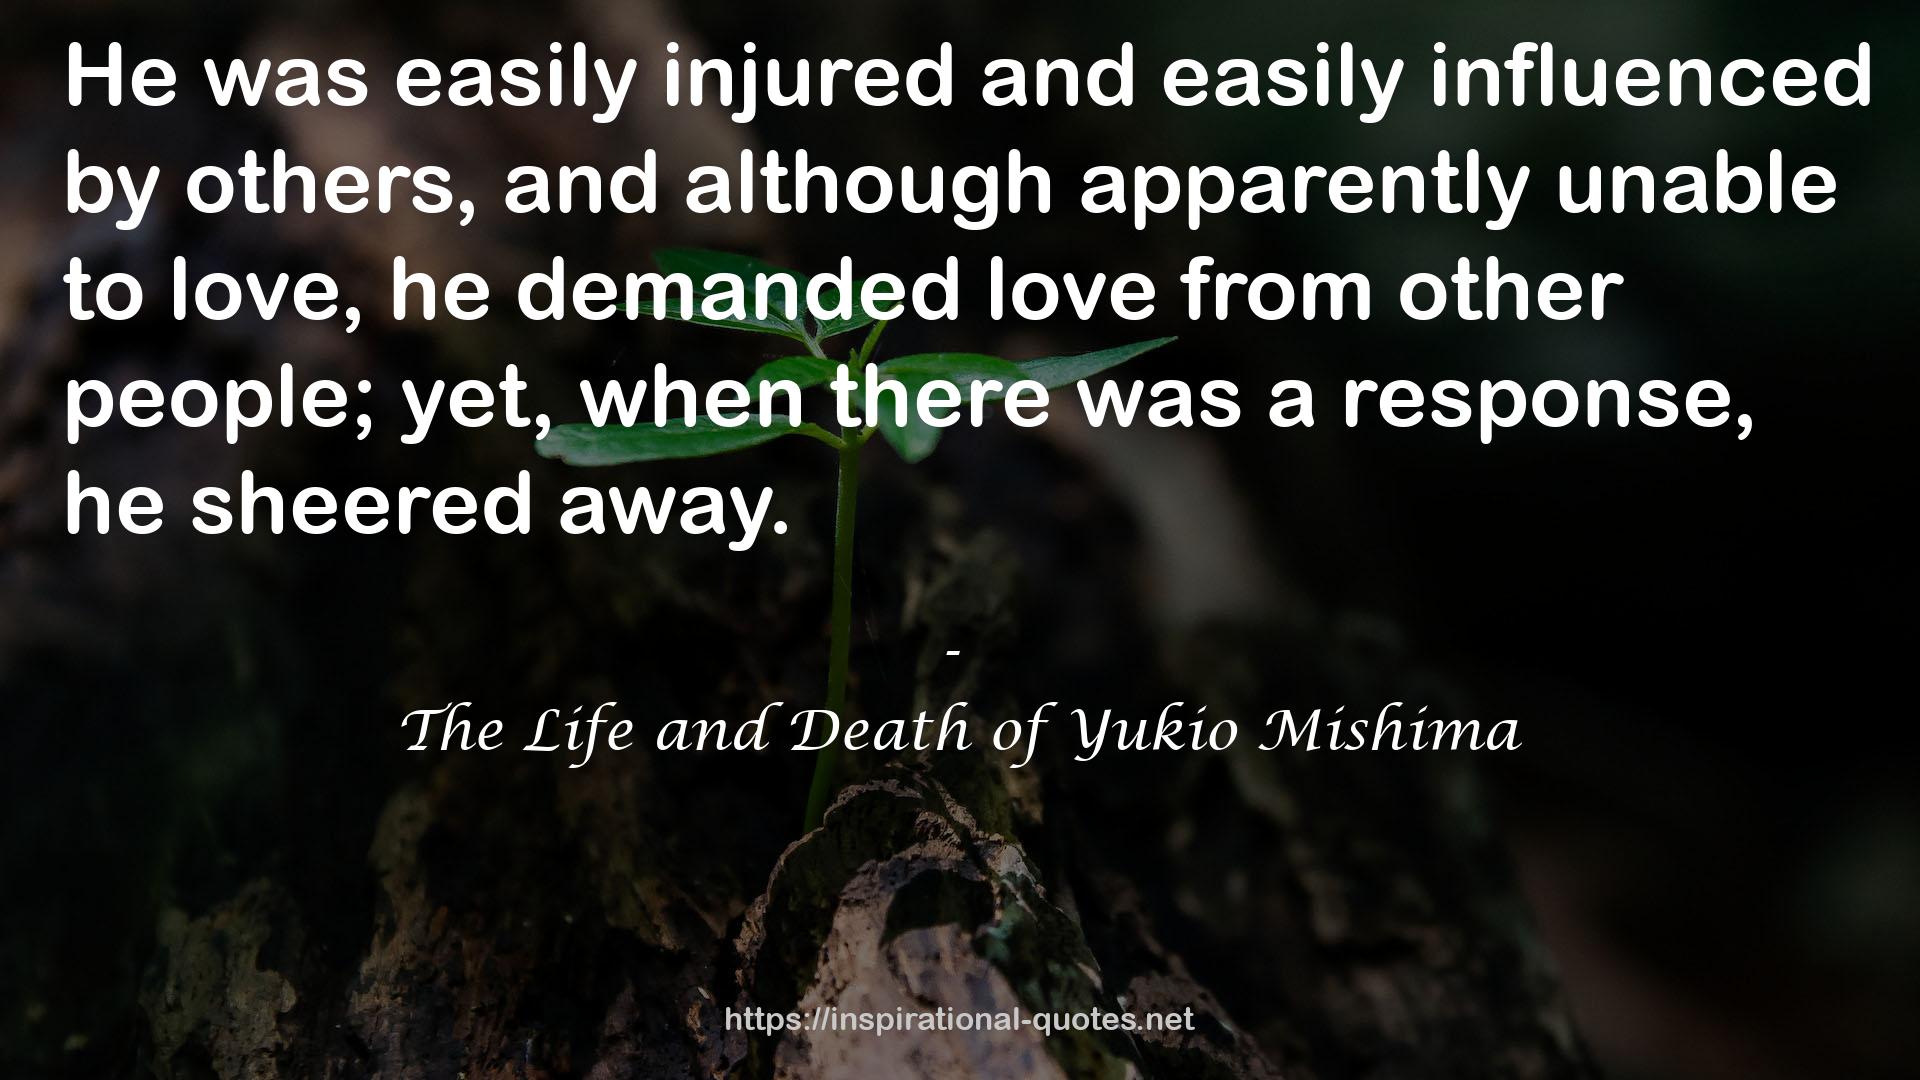 The Life and Death of Yukio Mishima QUOTES